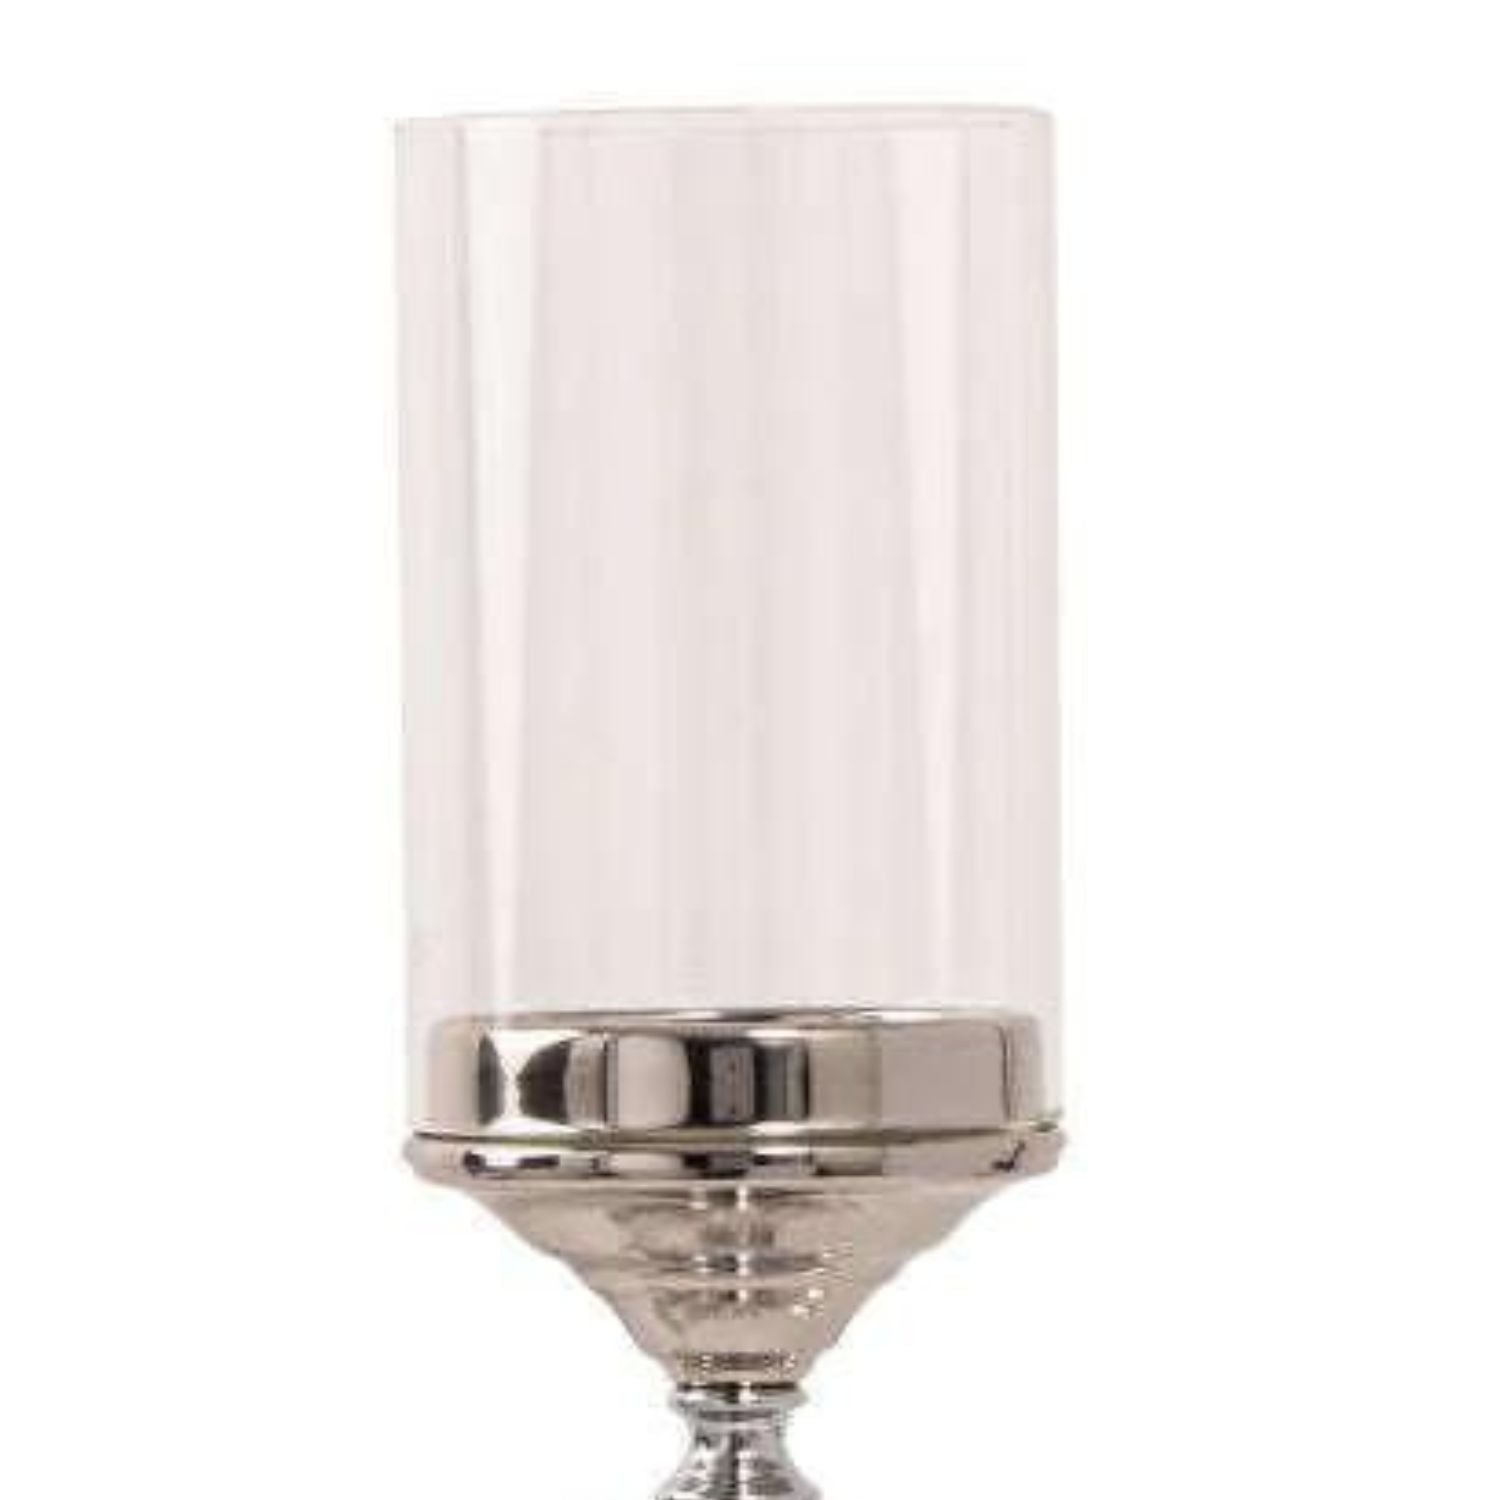 Nickel plated candle holder with crystal detailing